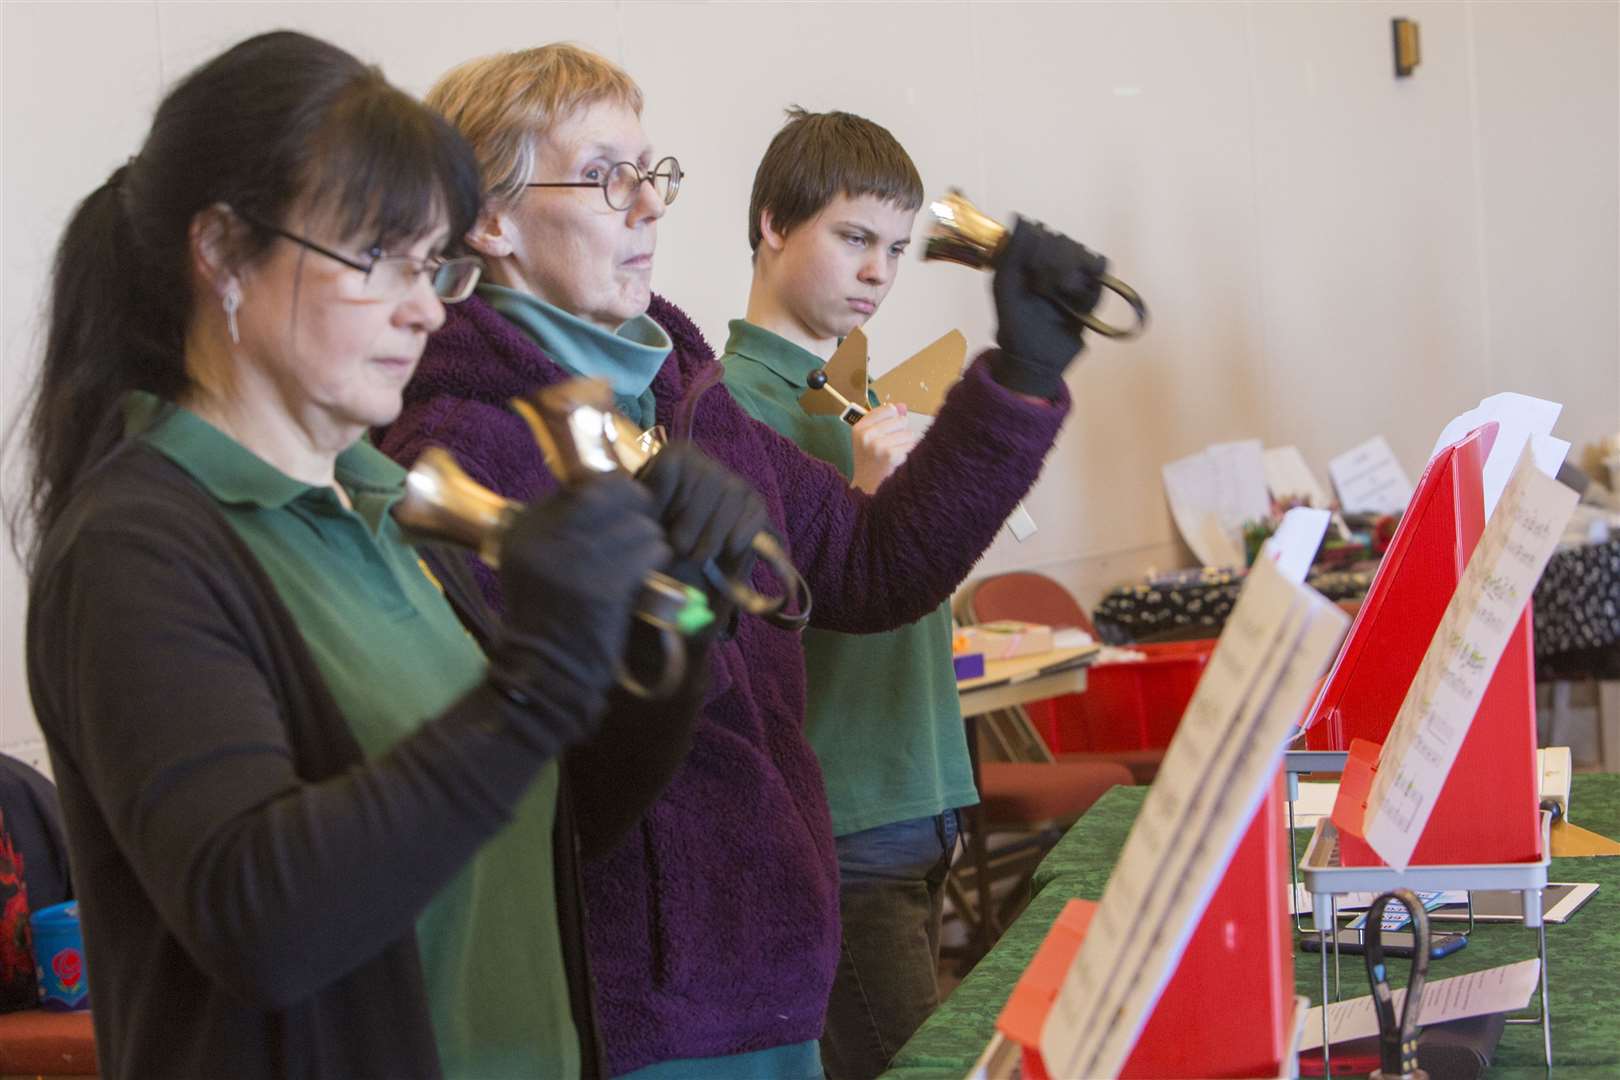 Caithness Handbell Ringers (from left) Susan Ball, Margaret Reid and Martin Matthews during a practice session. Picture: Robert MacDonald / Northern Studios